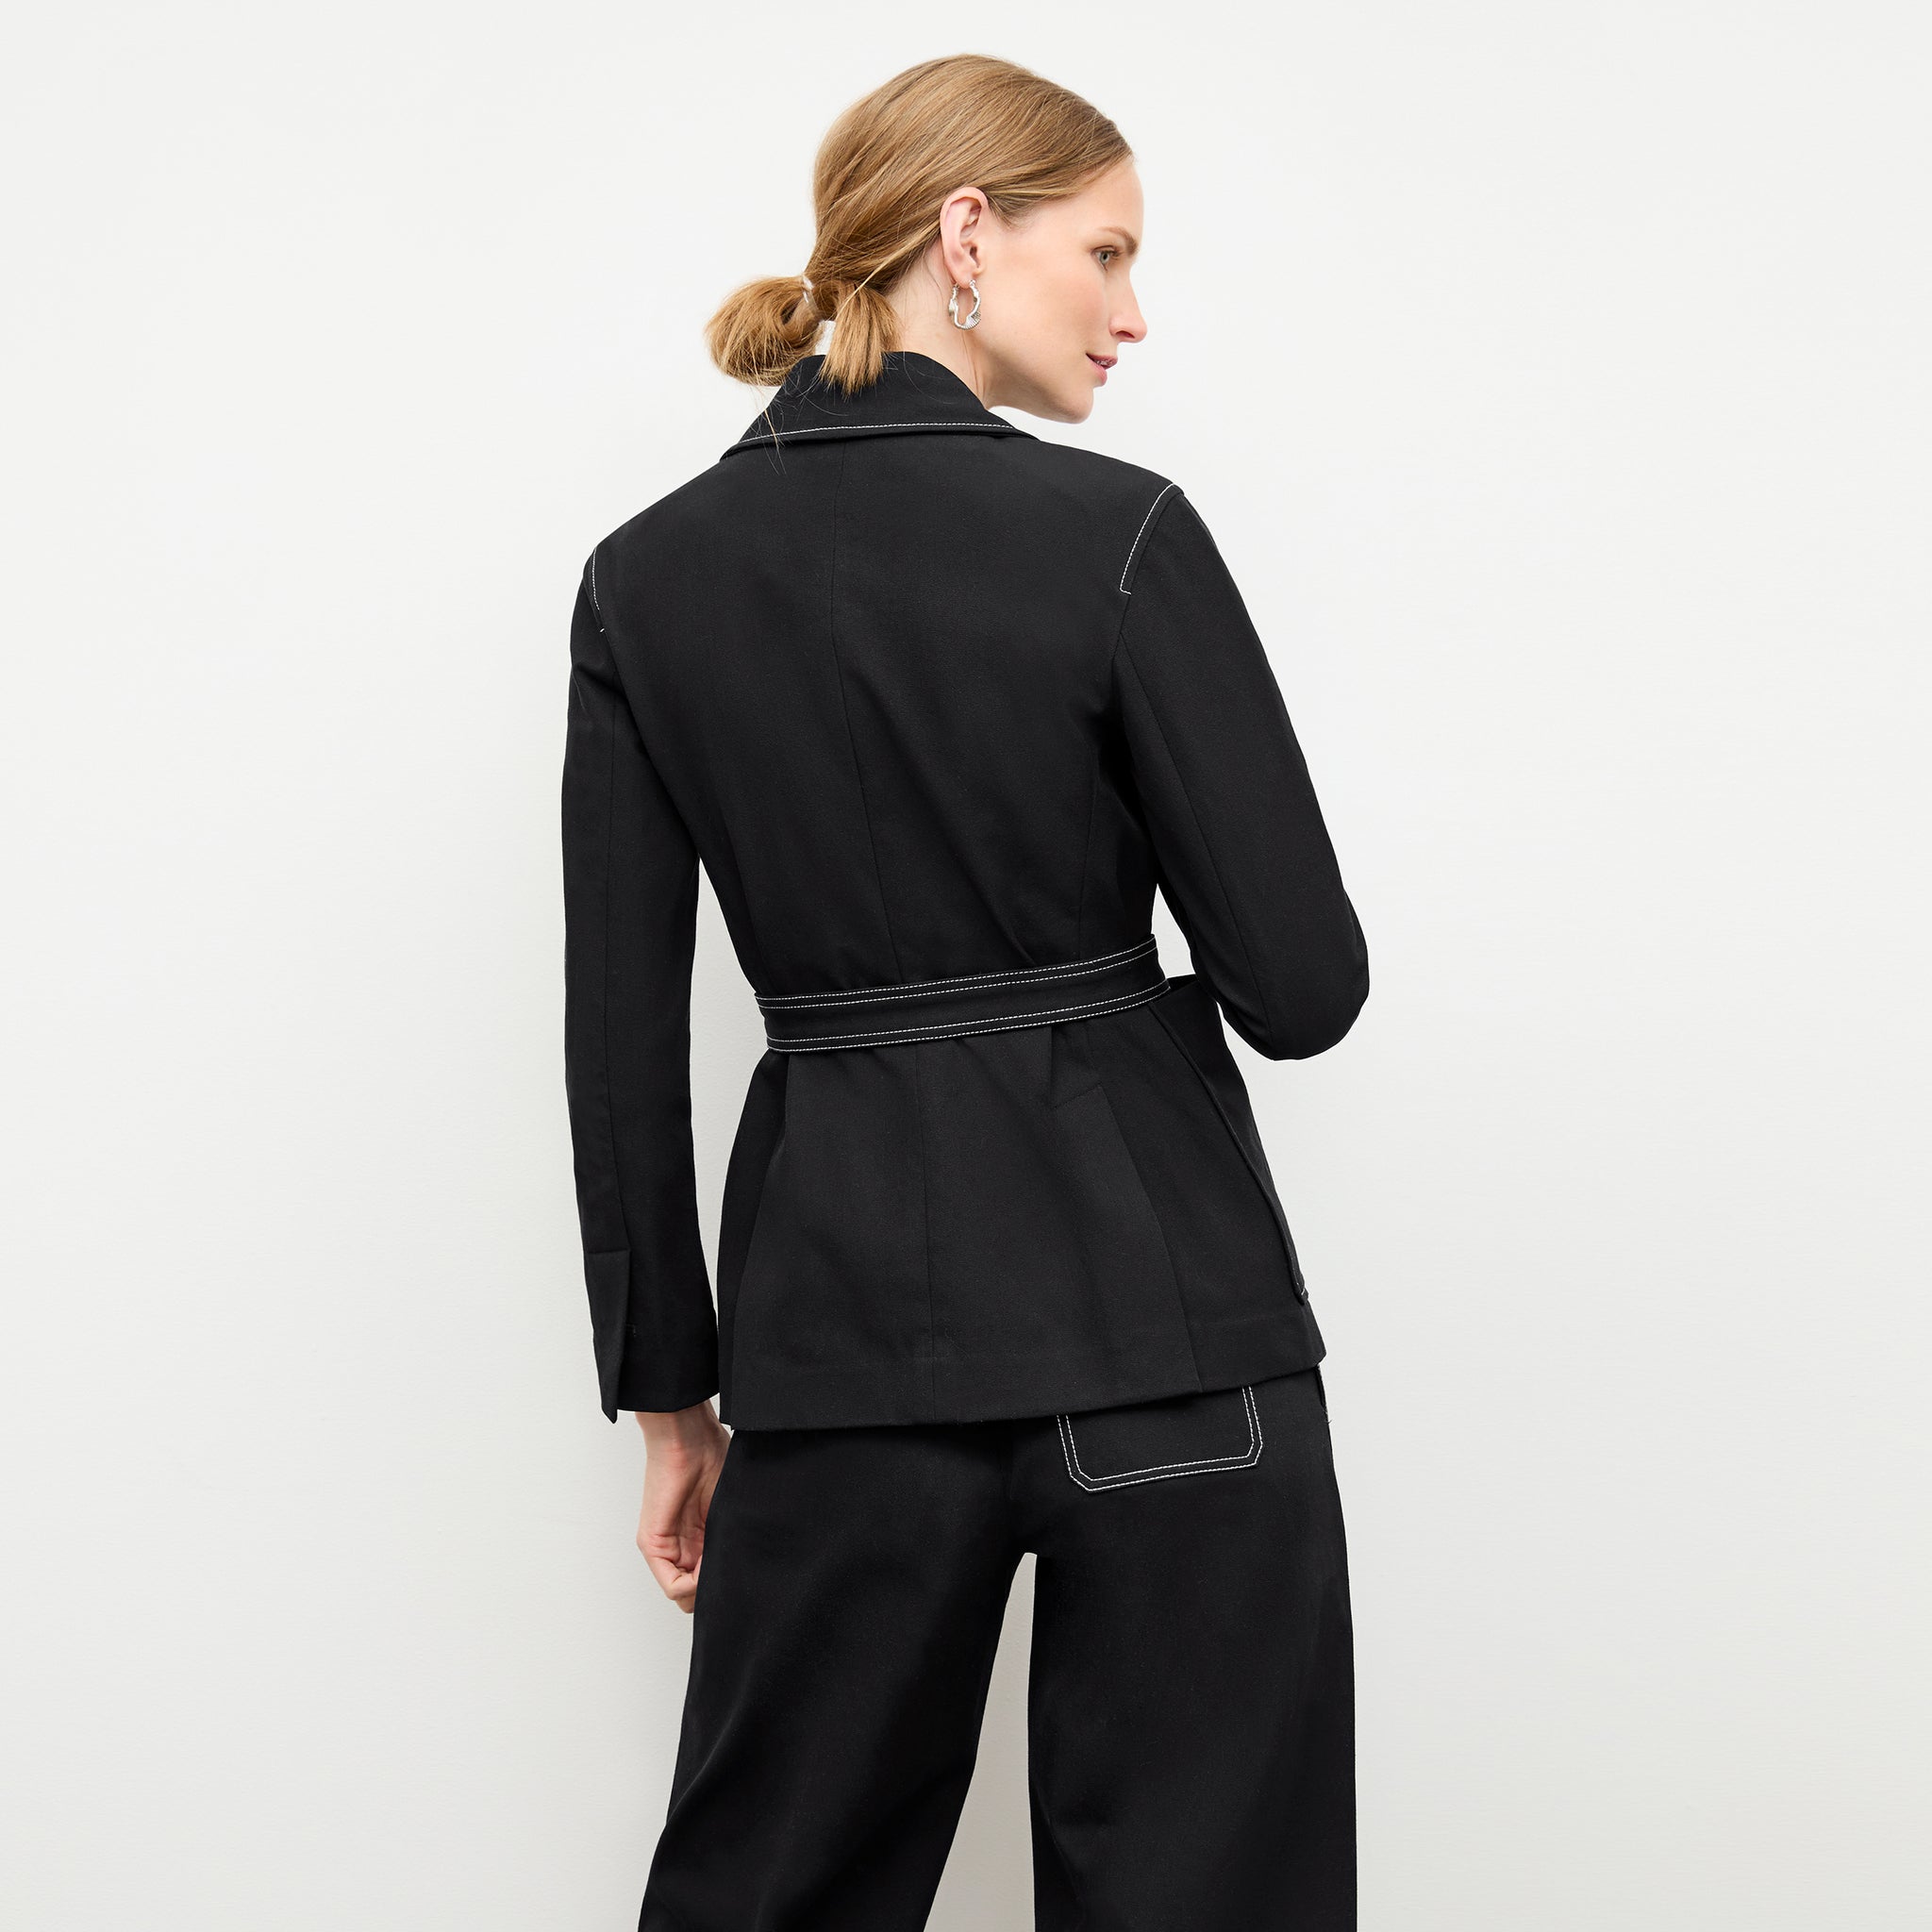 back image of a woman wearing the grenville jacket in black 